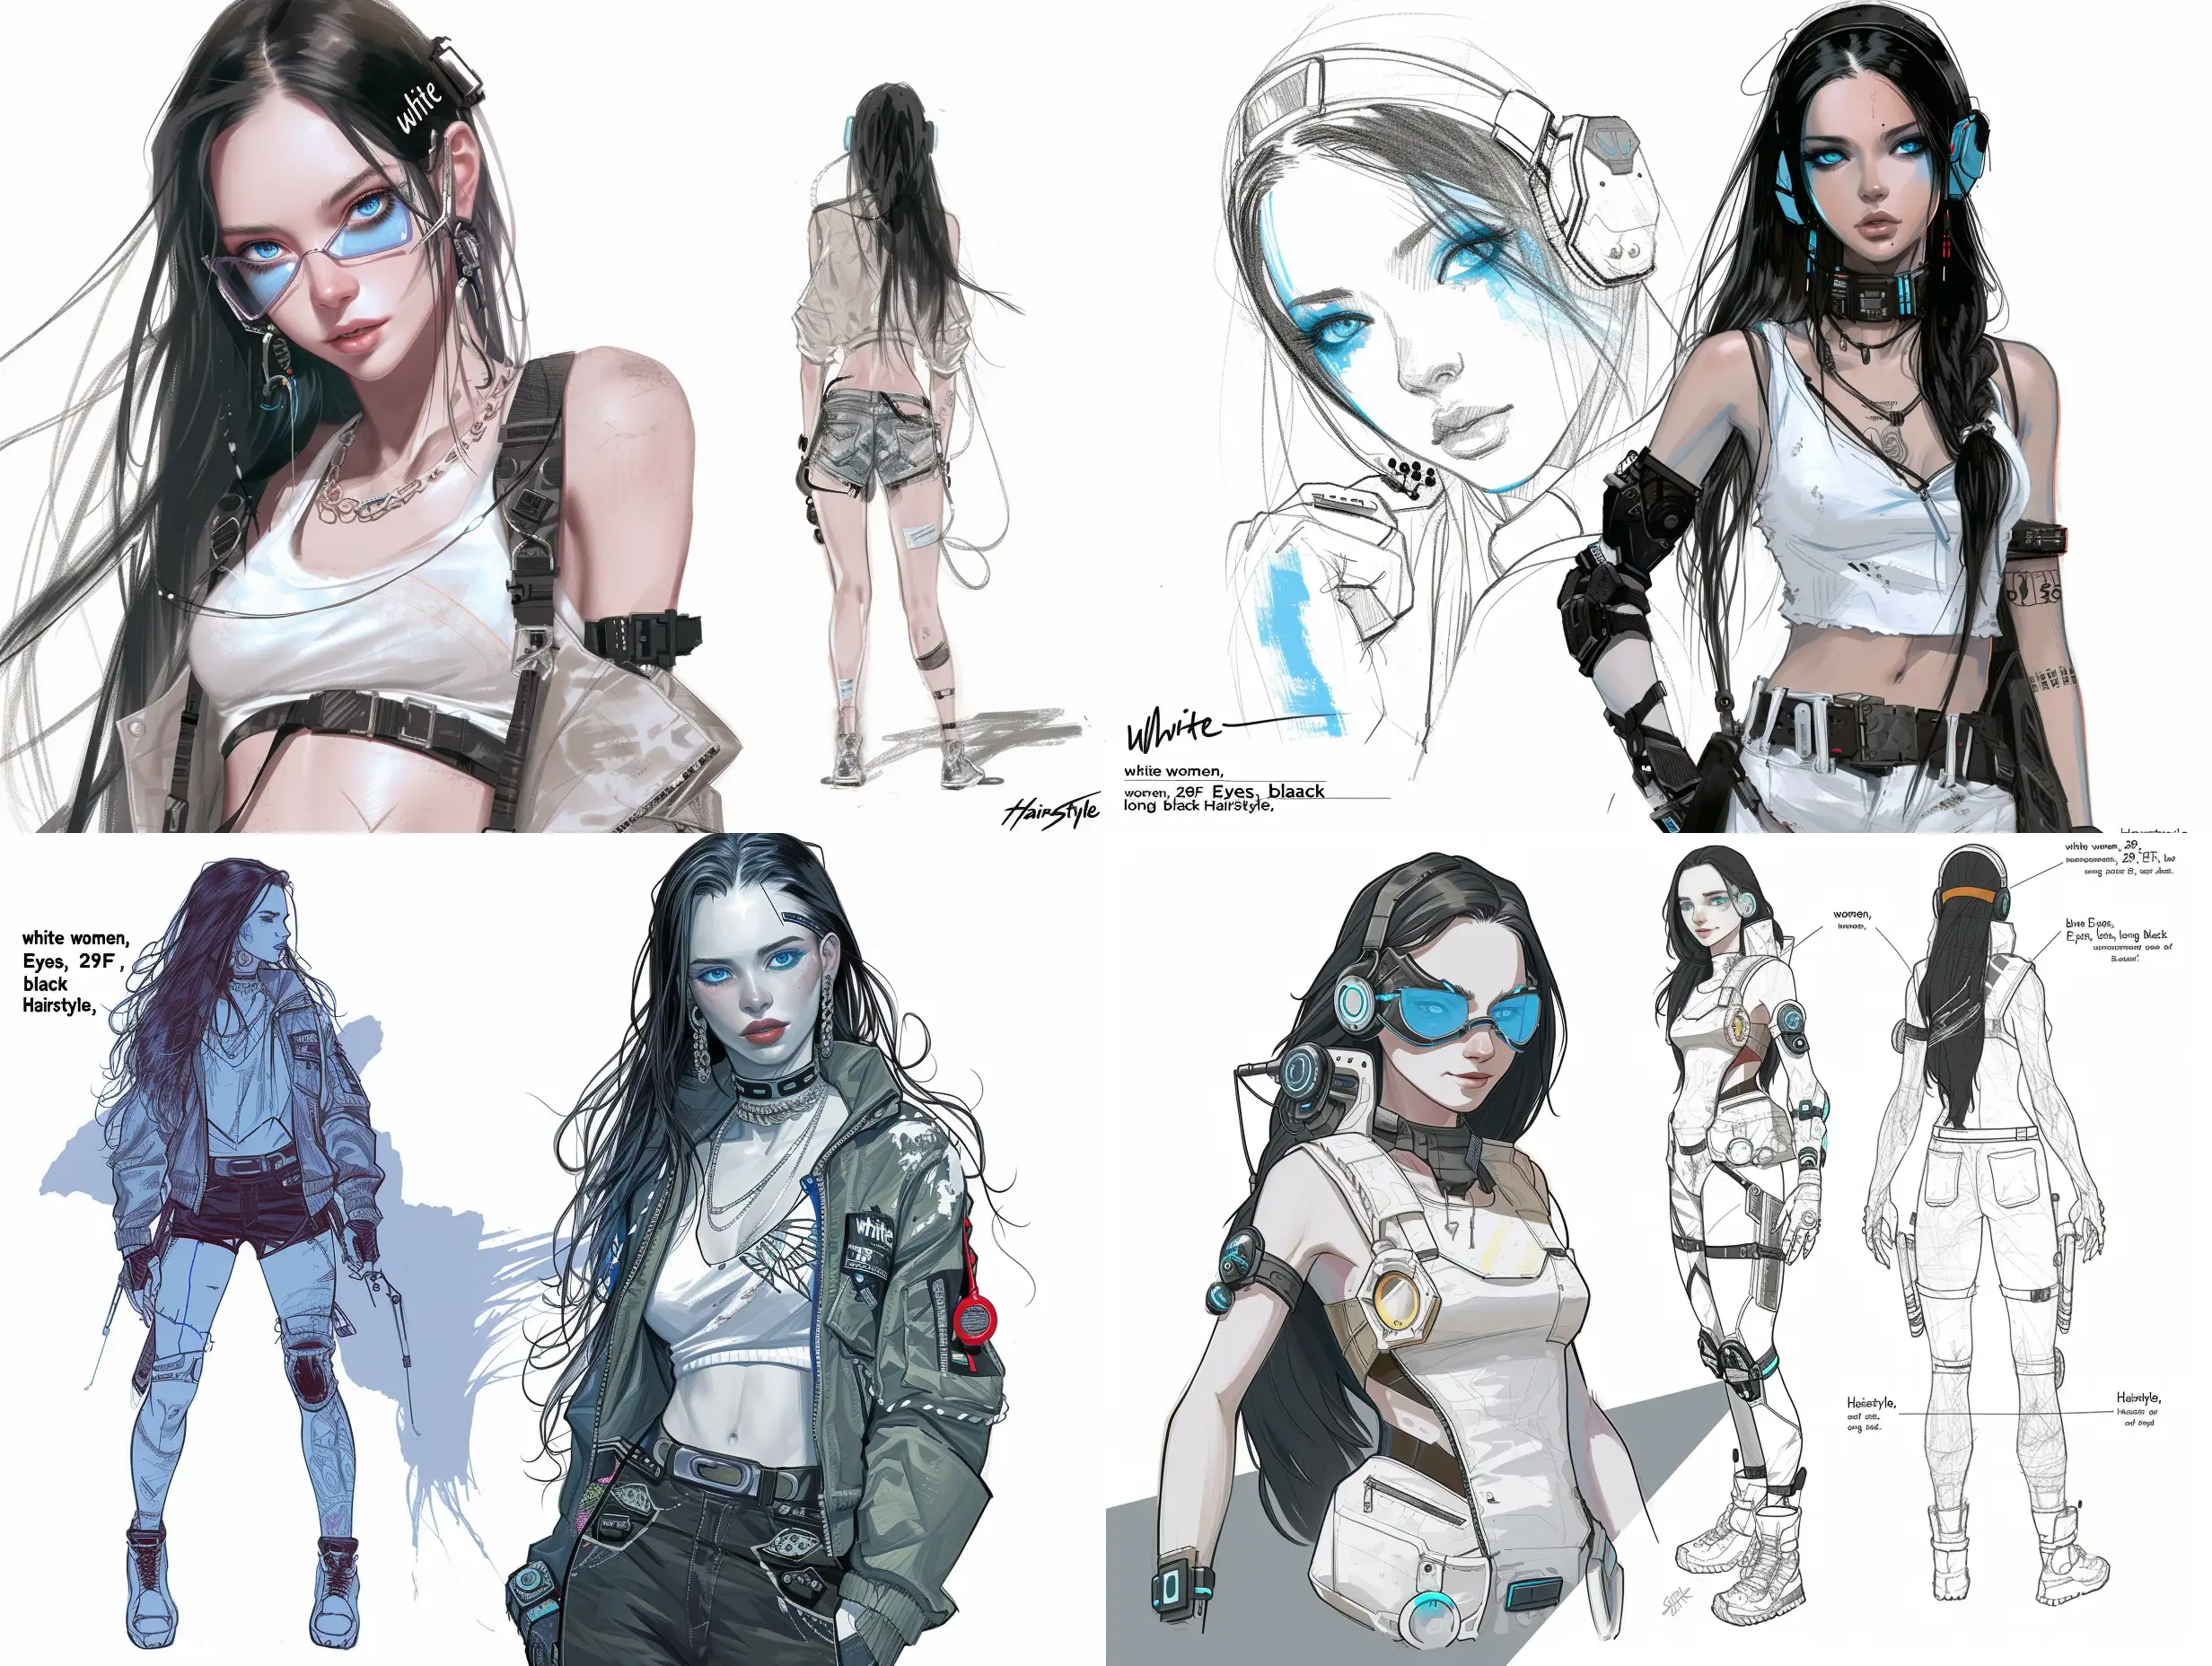 Cyberpunk-American-Woman-in-Sketch-Style-with-Blue-Eyes-and-Long-Black-Hair